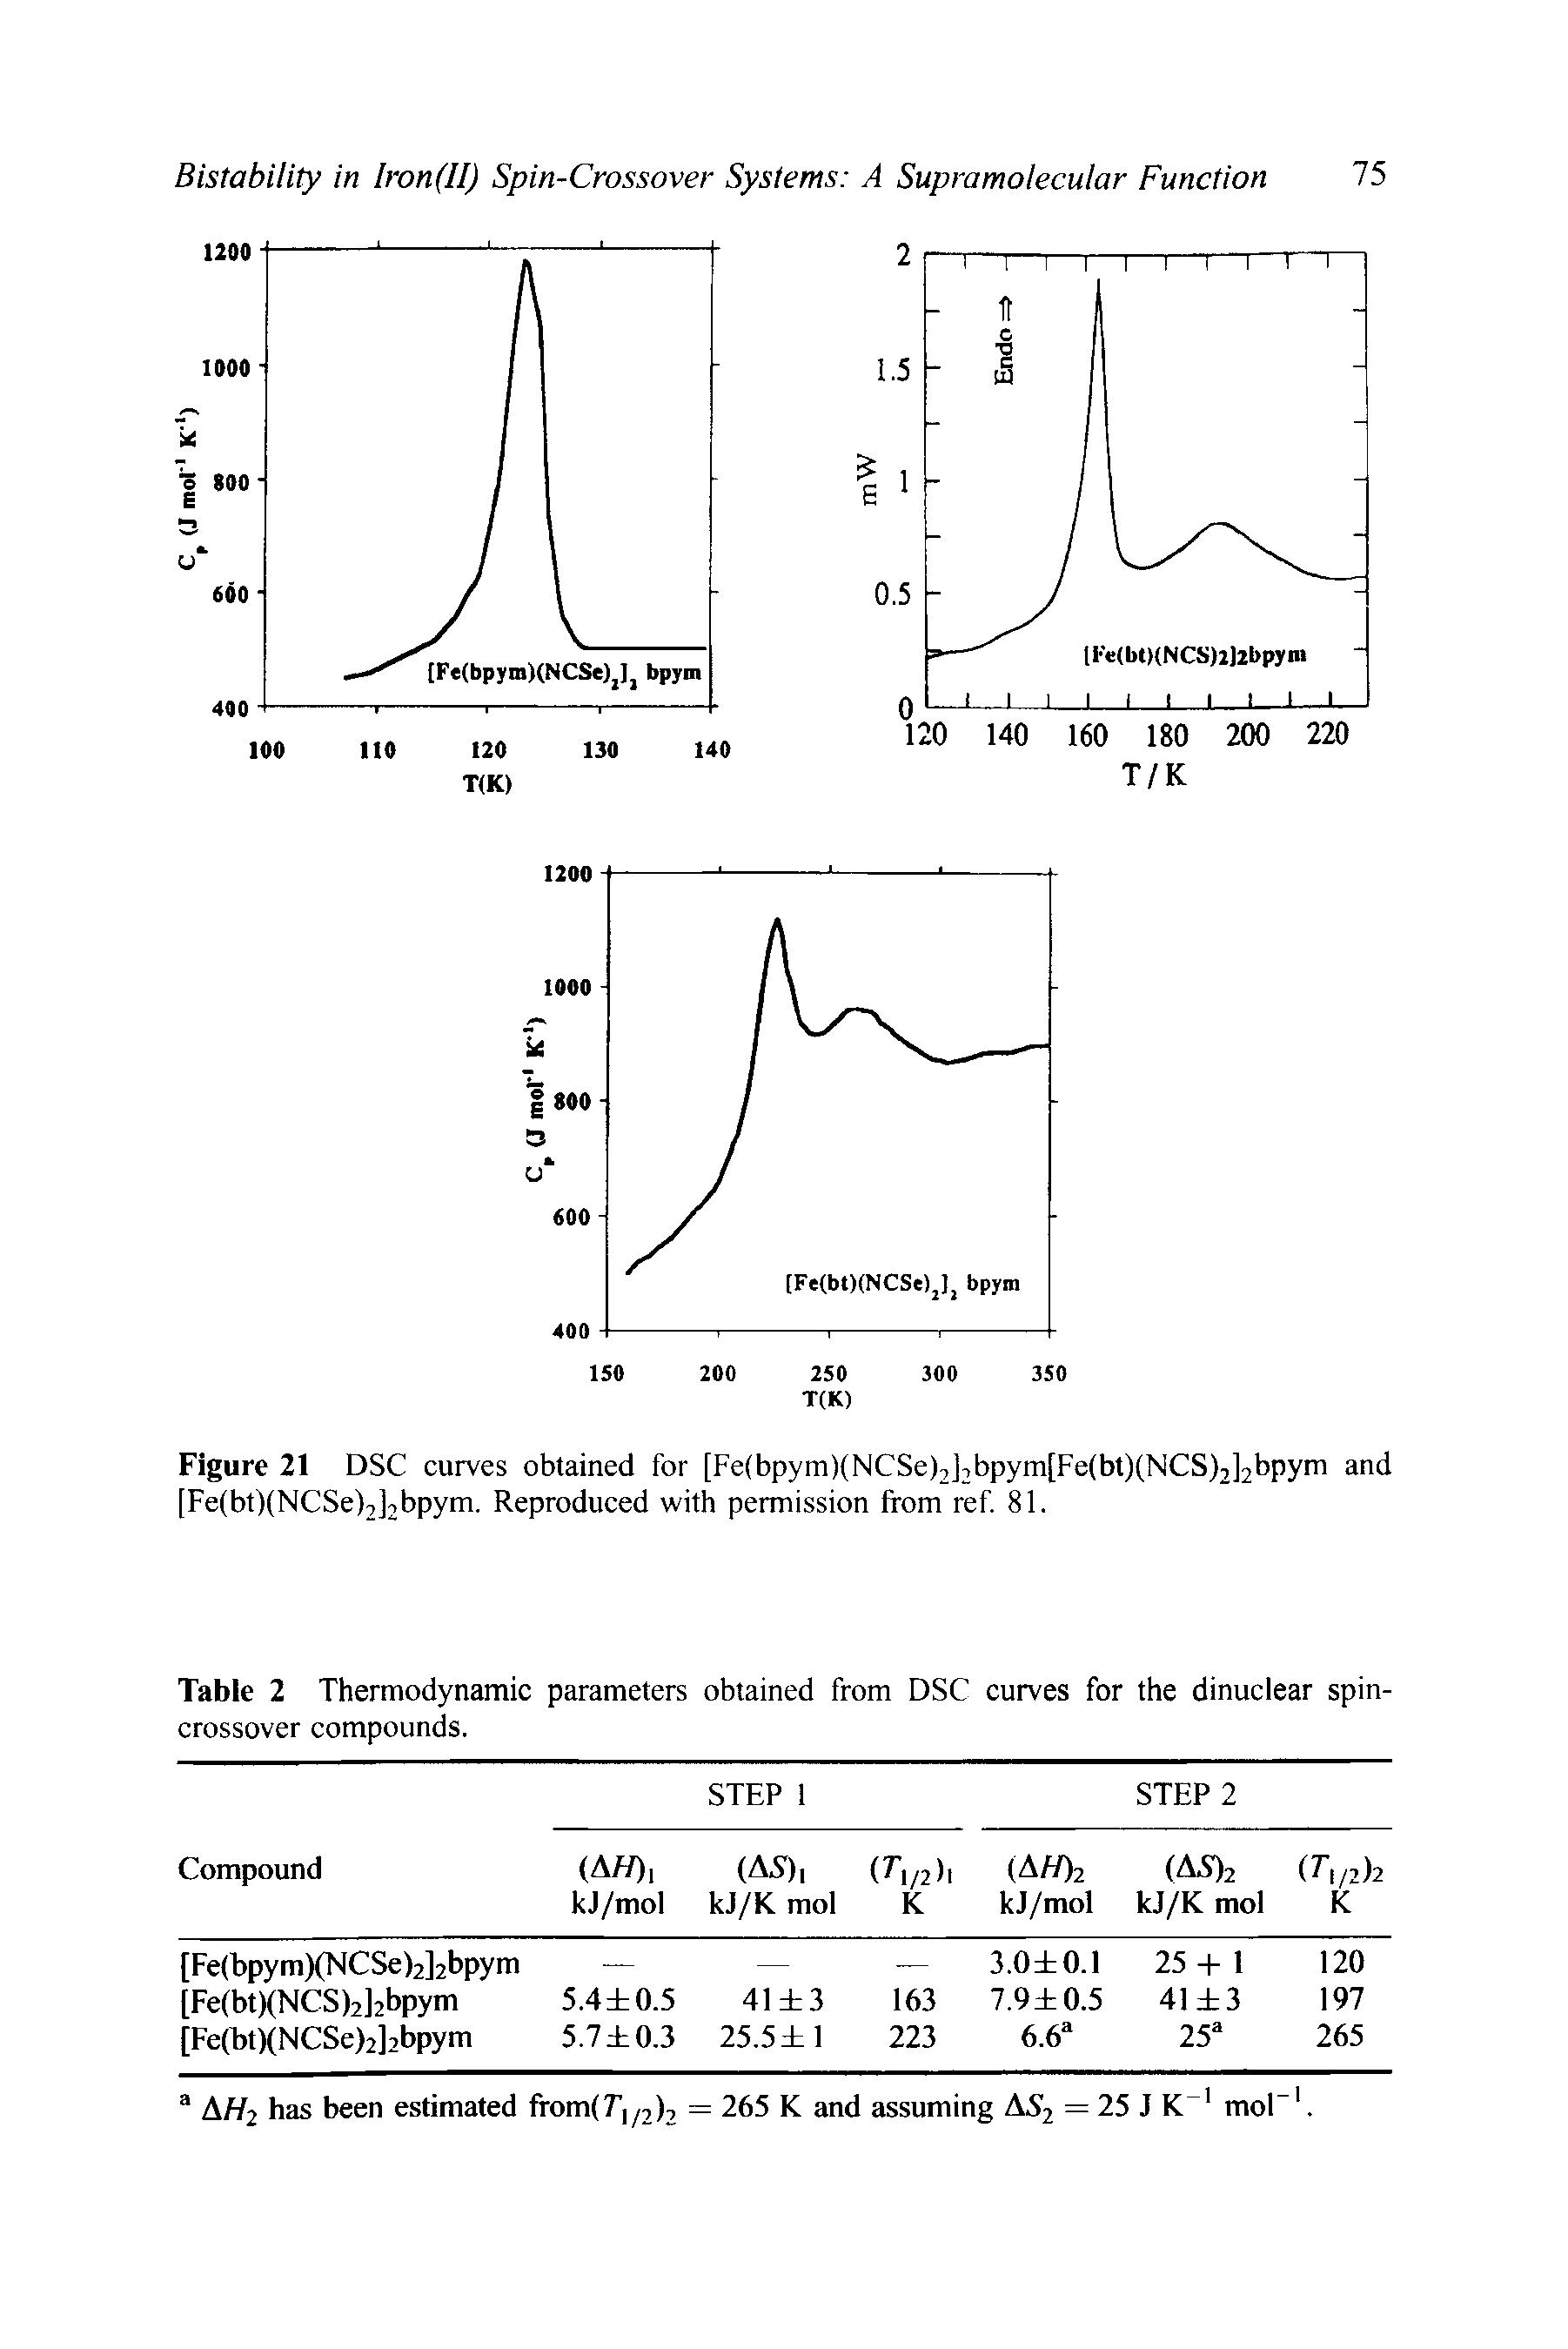 Table 2 Thermodynamic parameters obtained from DSC curves for the dinuclear spin-crossover compounds.